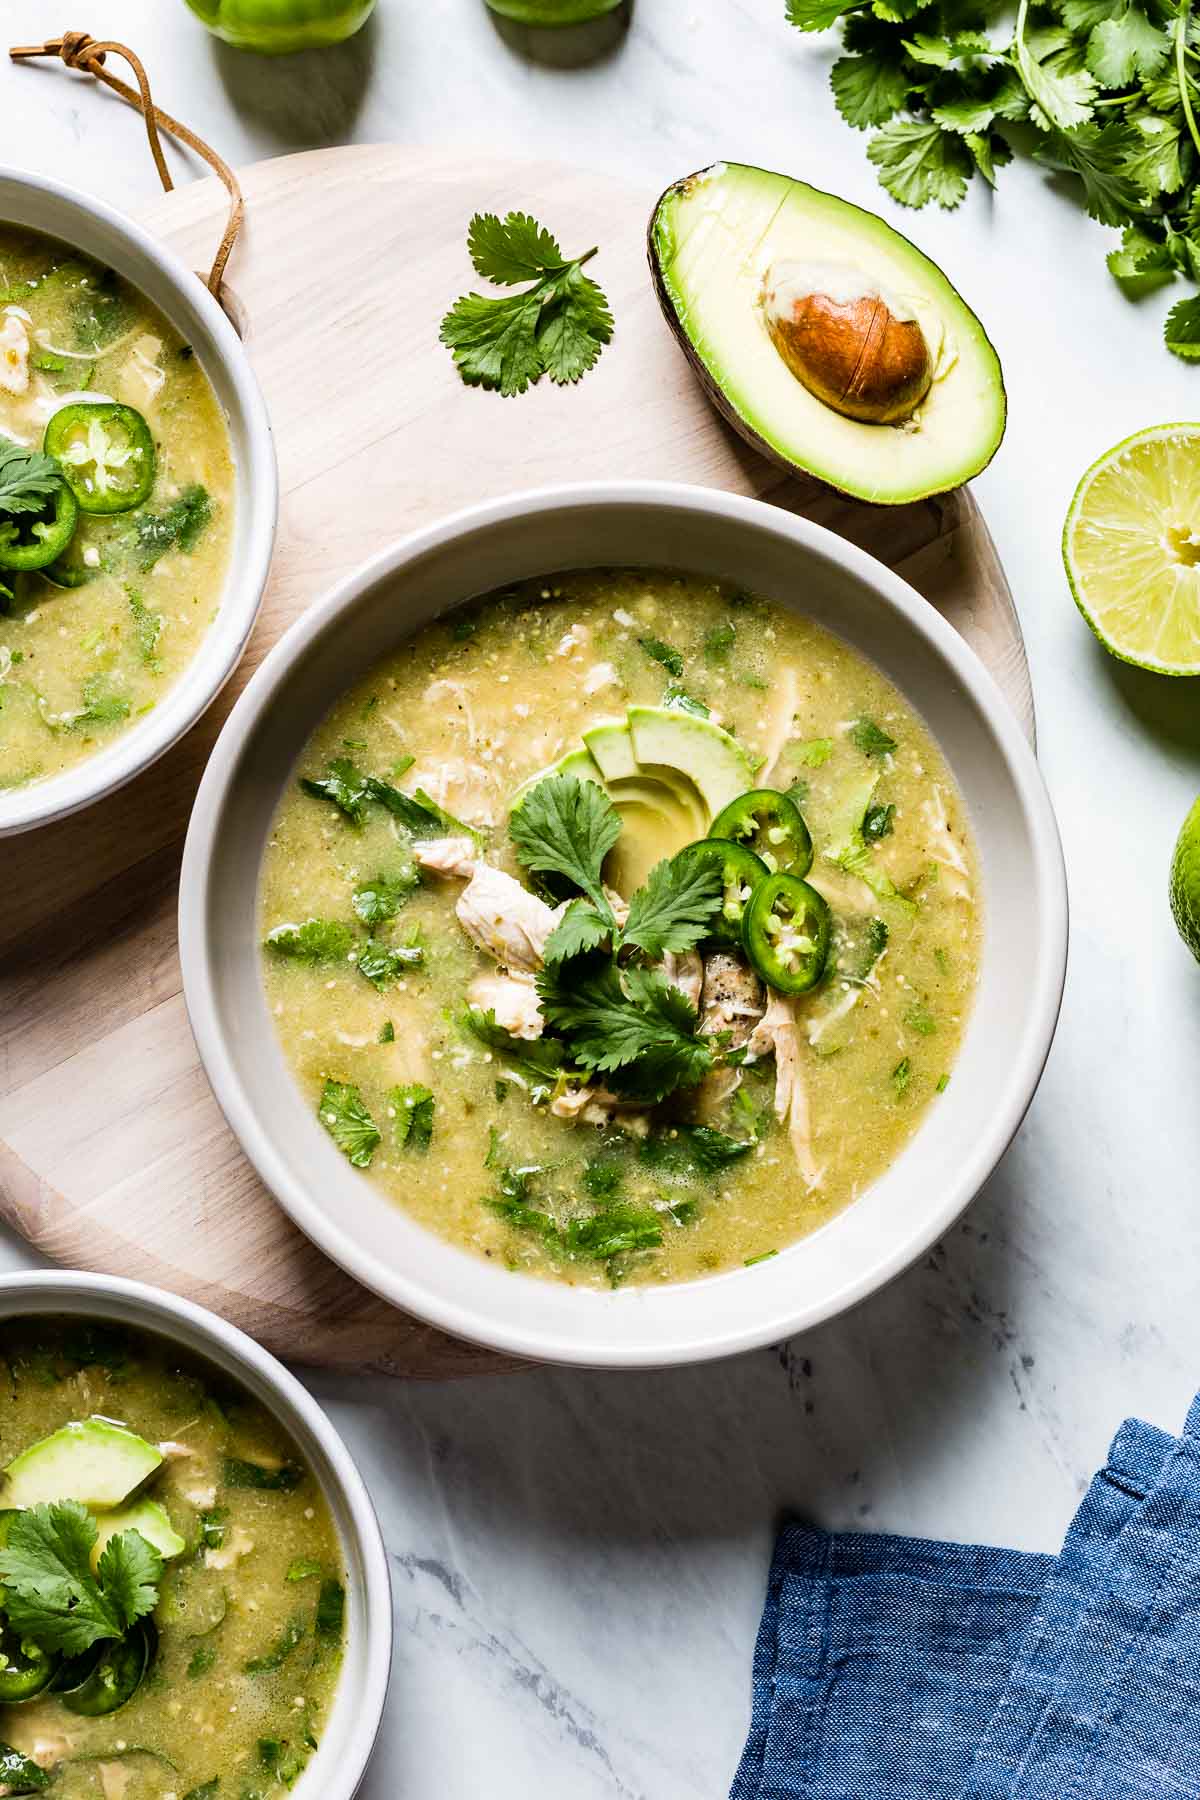 Slow Cooker Chicken tomatillo stew garnished with avocados, cilantro and jalapenos